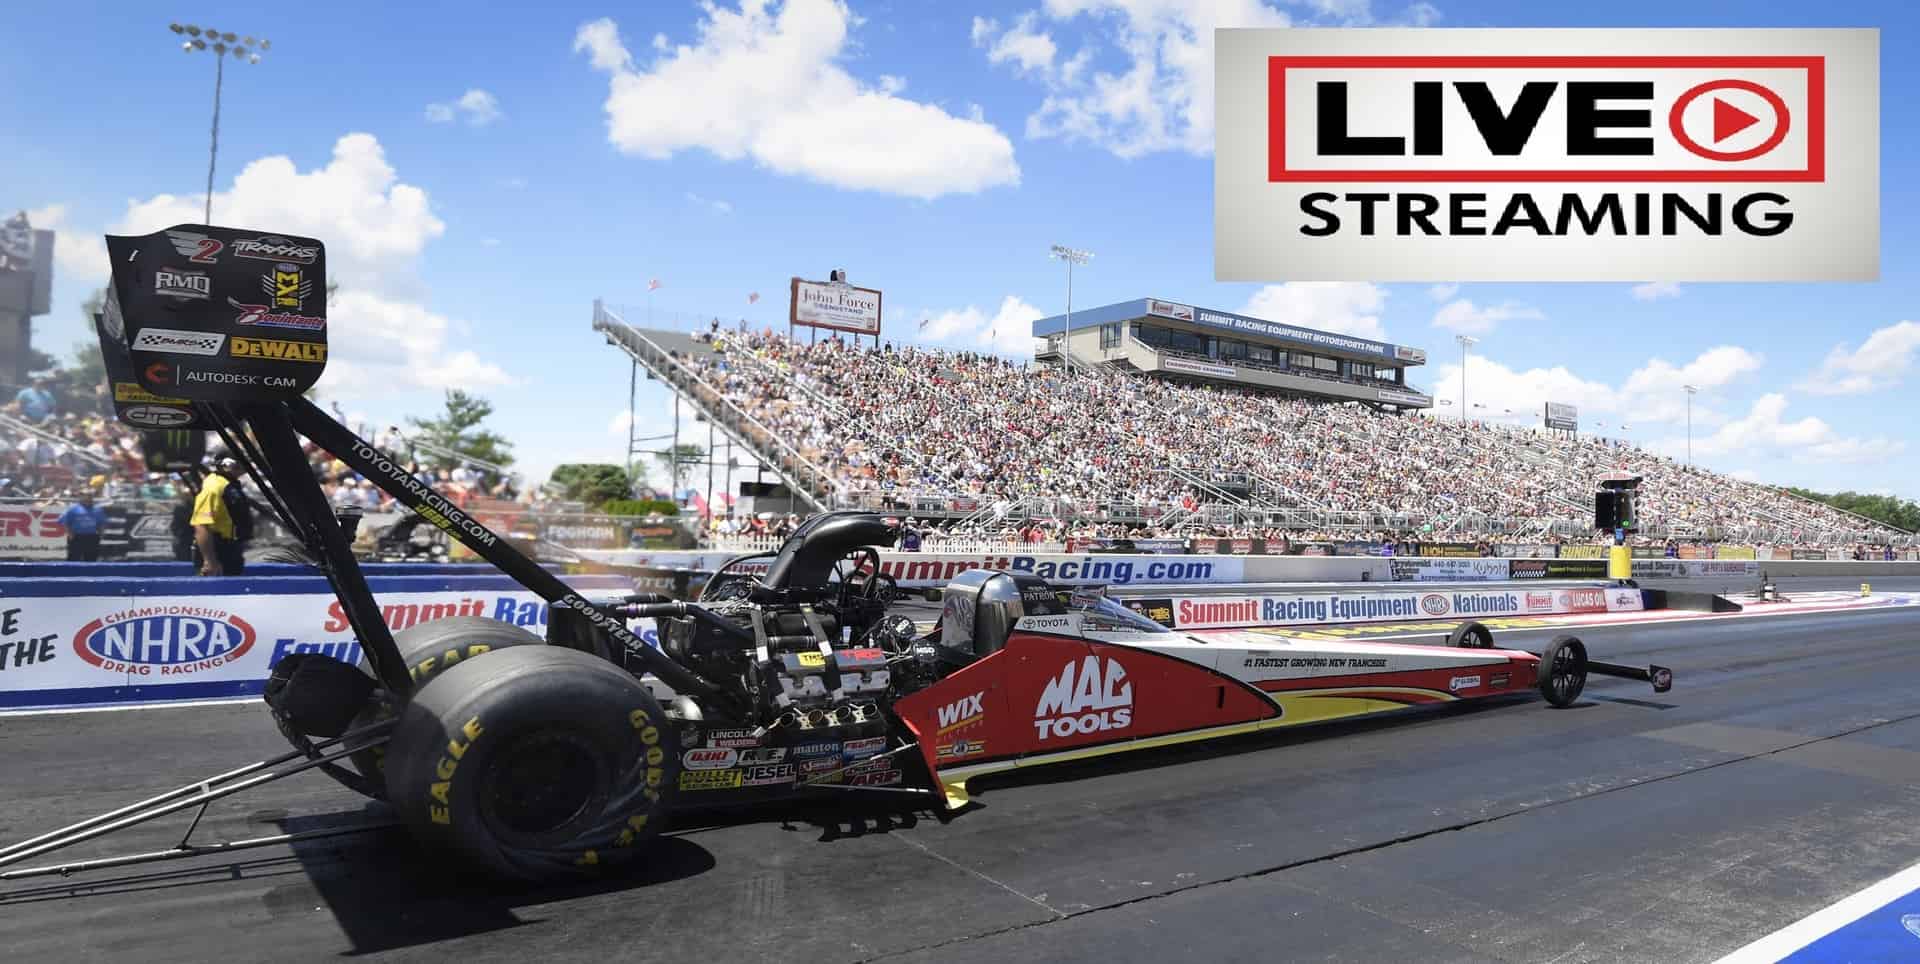 NHRA Southeast Division live streaming